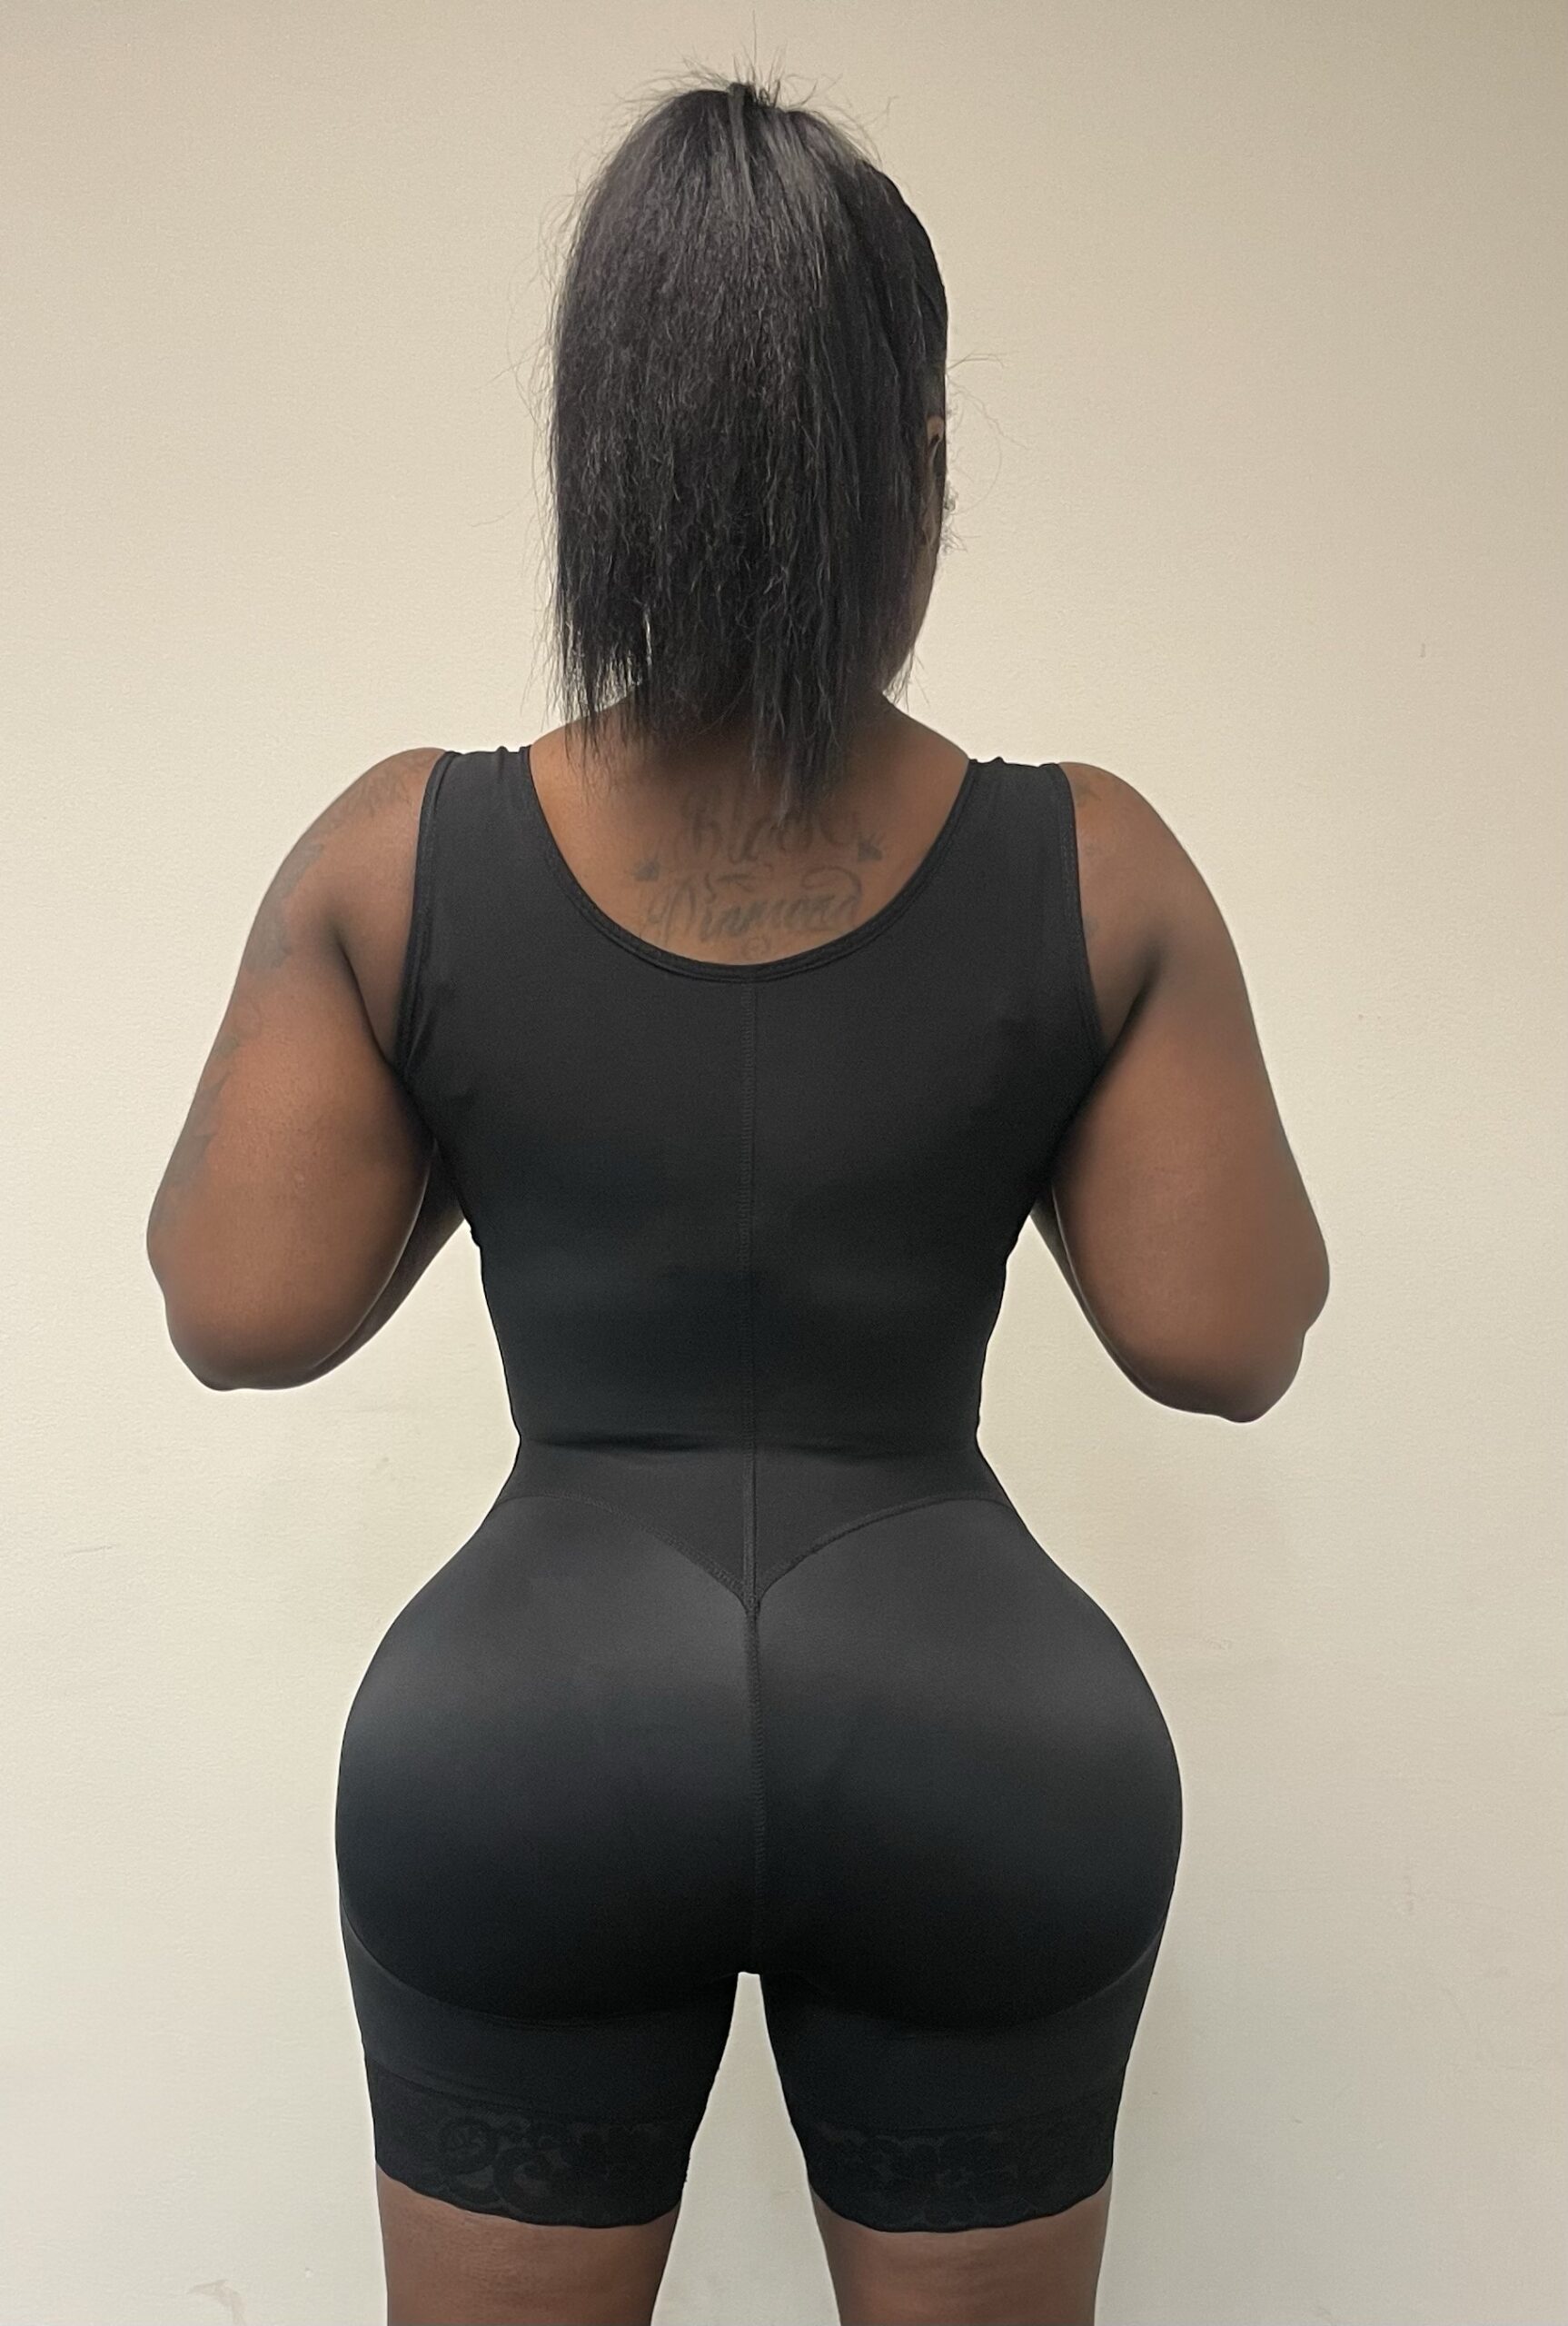 Fajas Uplady Butt Lifting Shapewear Bodysuit with Wide Hips